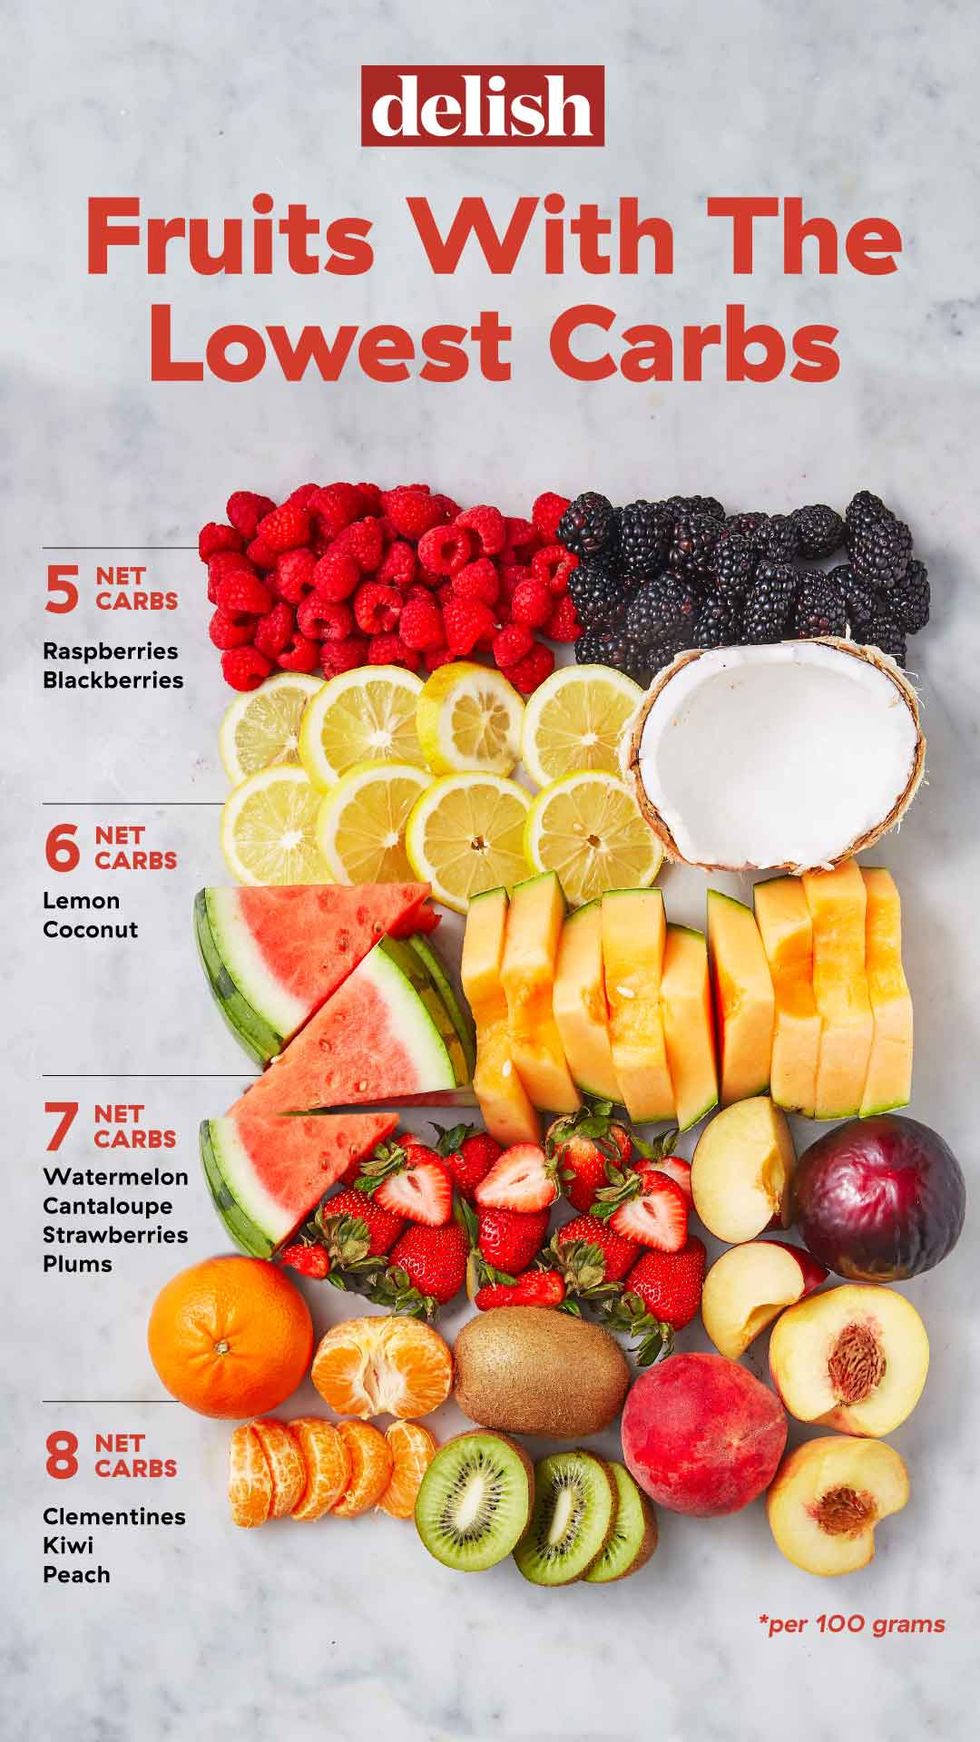 Low-Carb Fruits And Berries — Guide To The Best Fruits For Keto Diet